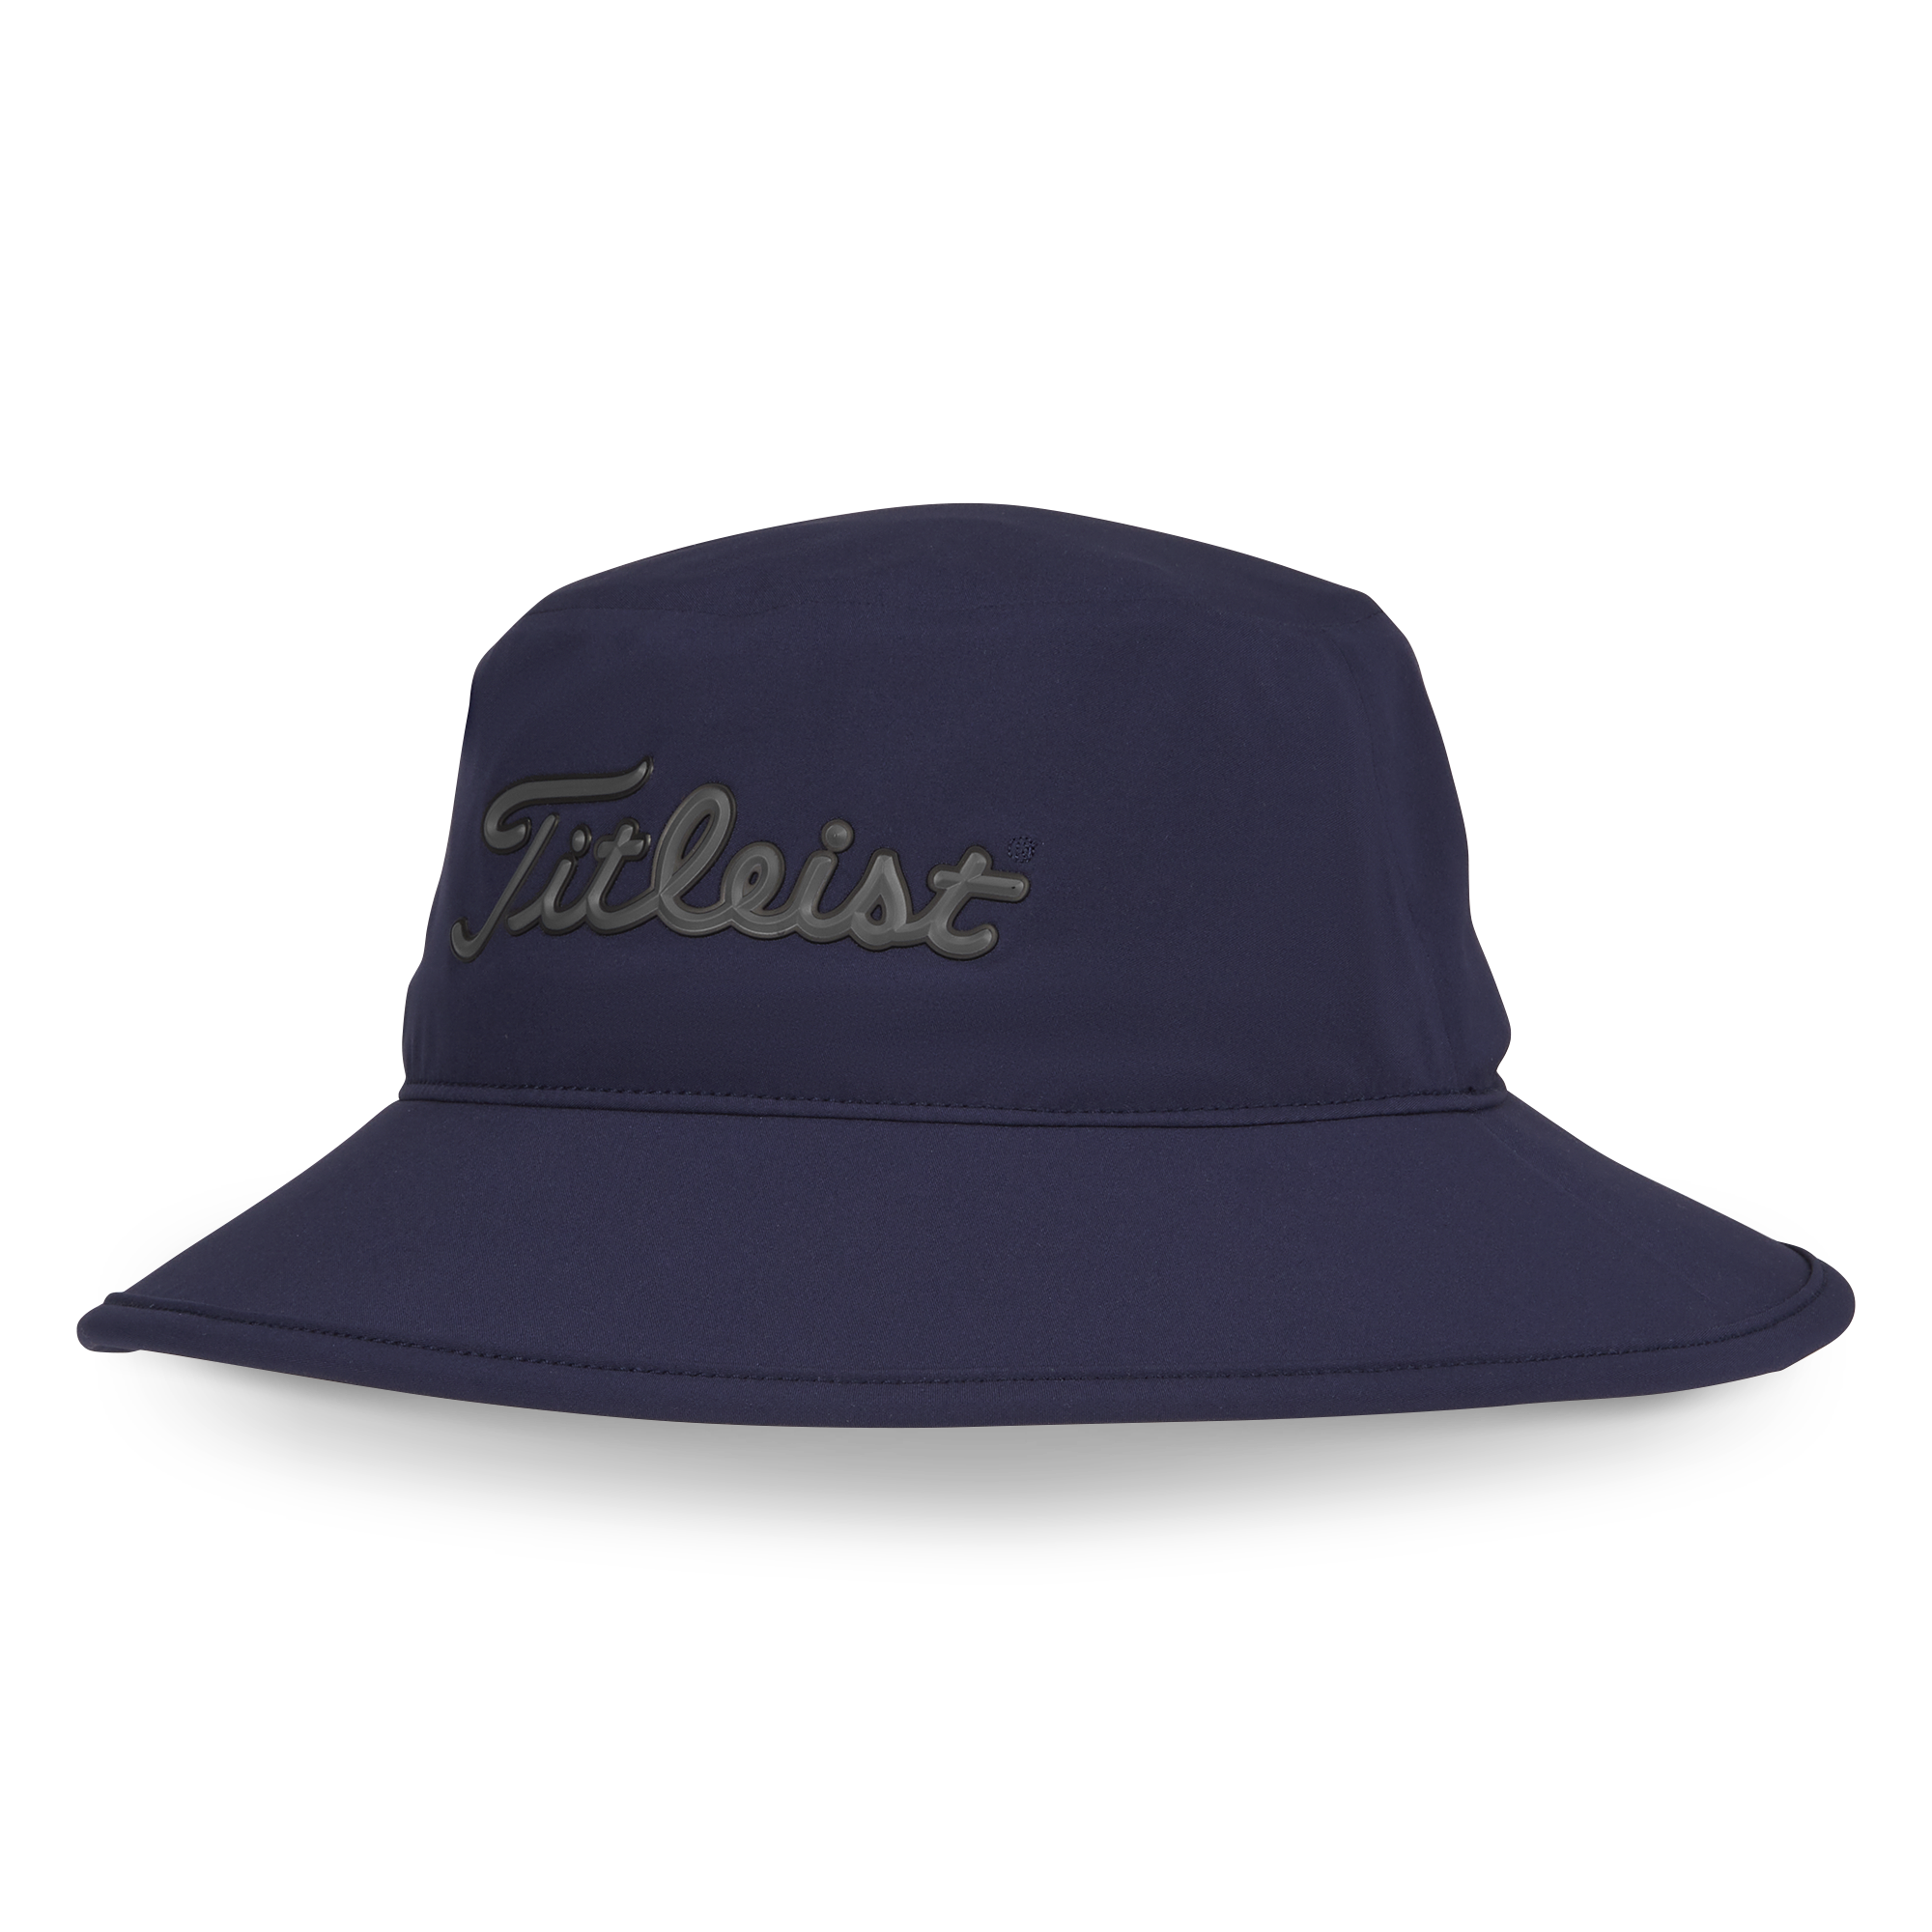 Titleist Official Players StaDry Bucket in Navy/Charcoal